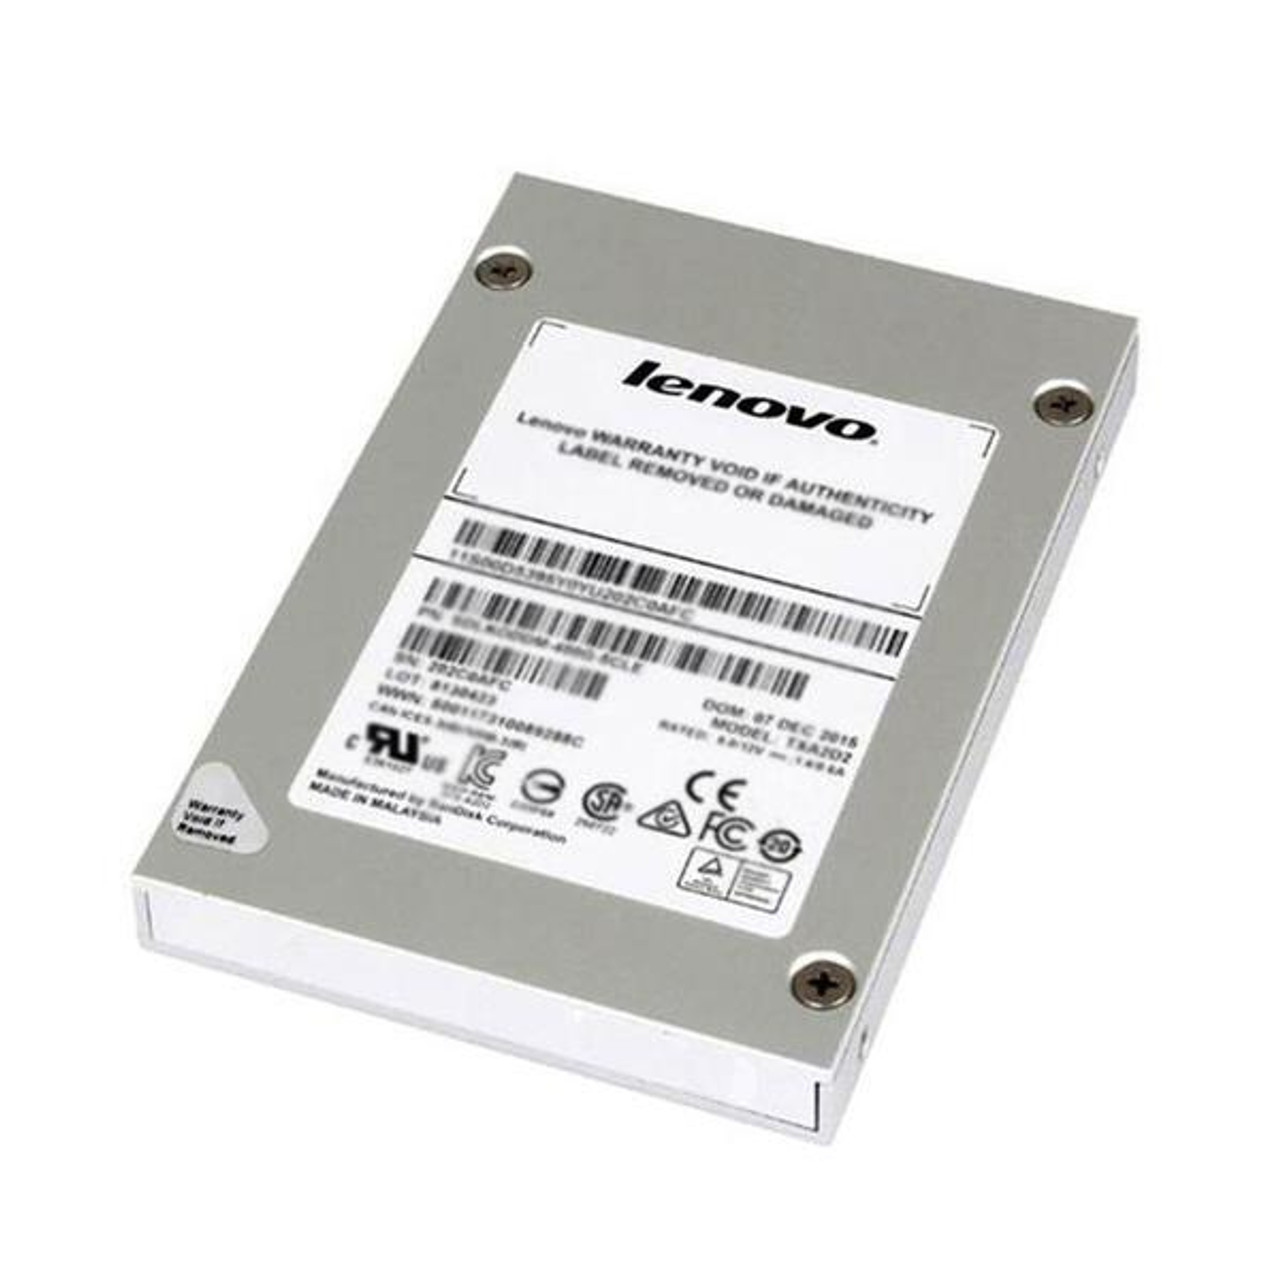 Lenovo 480GB SATA 6Gbps Internal Solid State Drive (SSD)